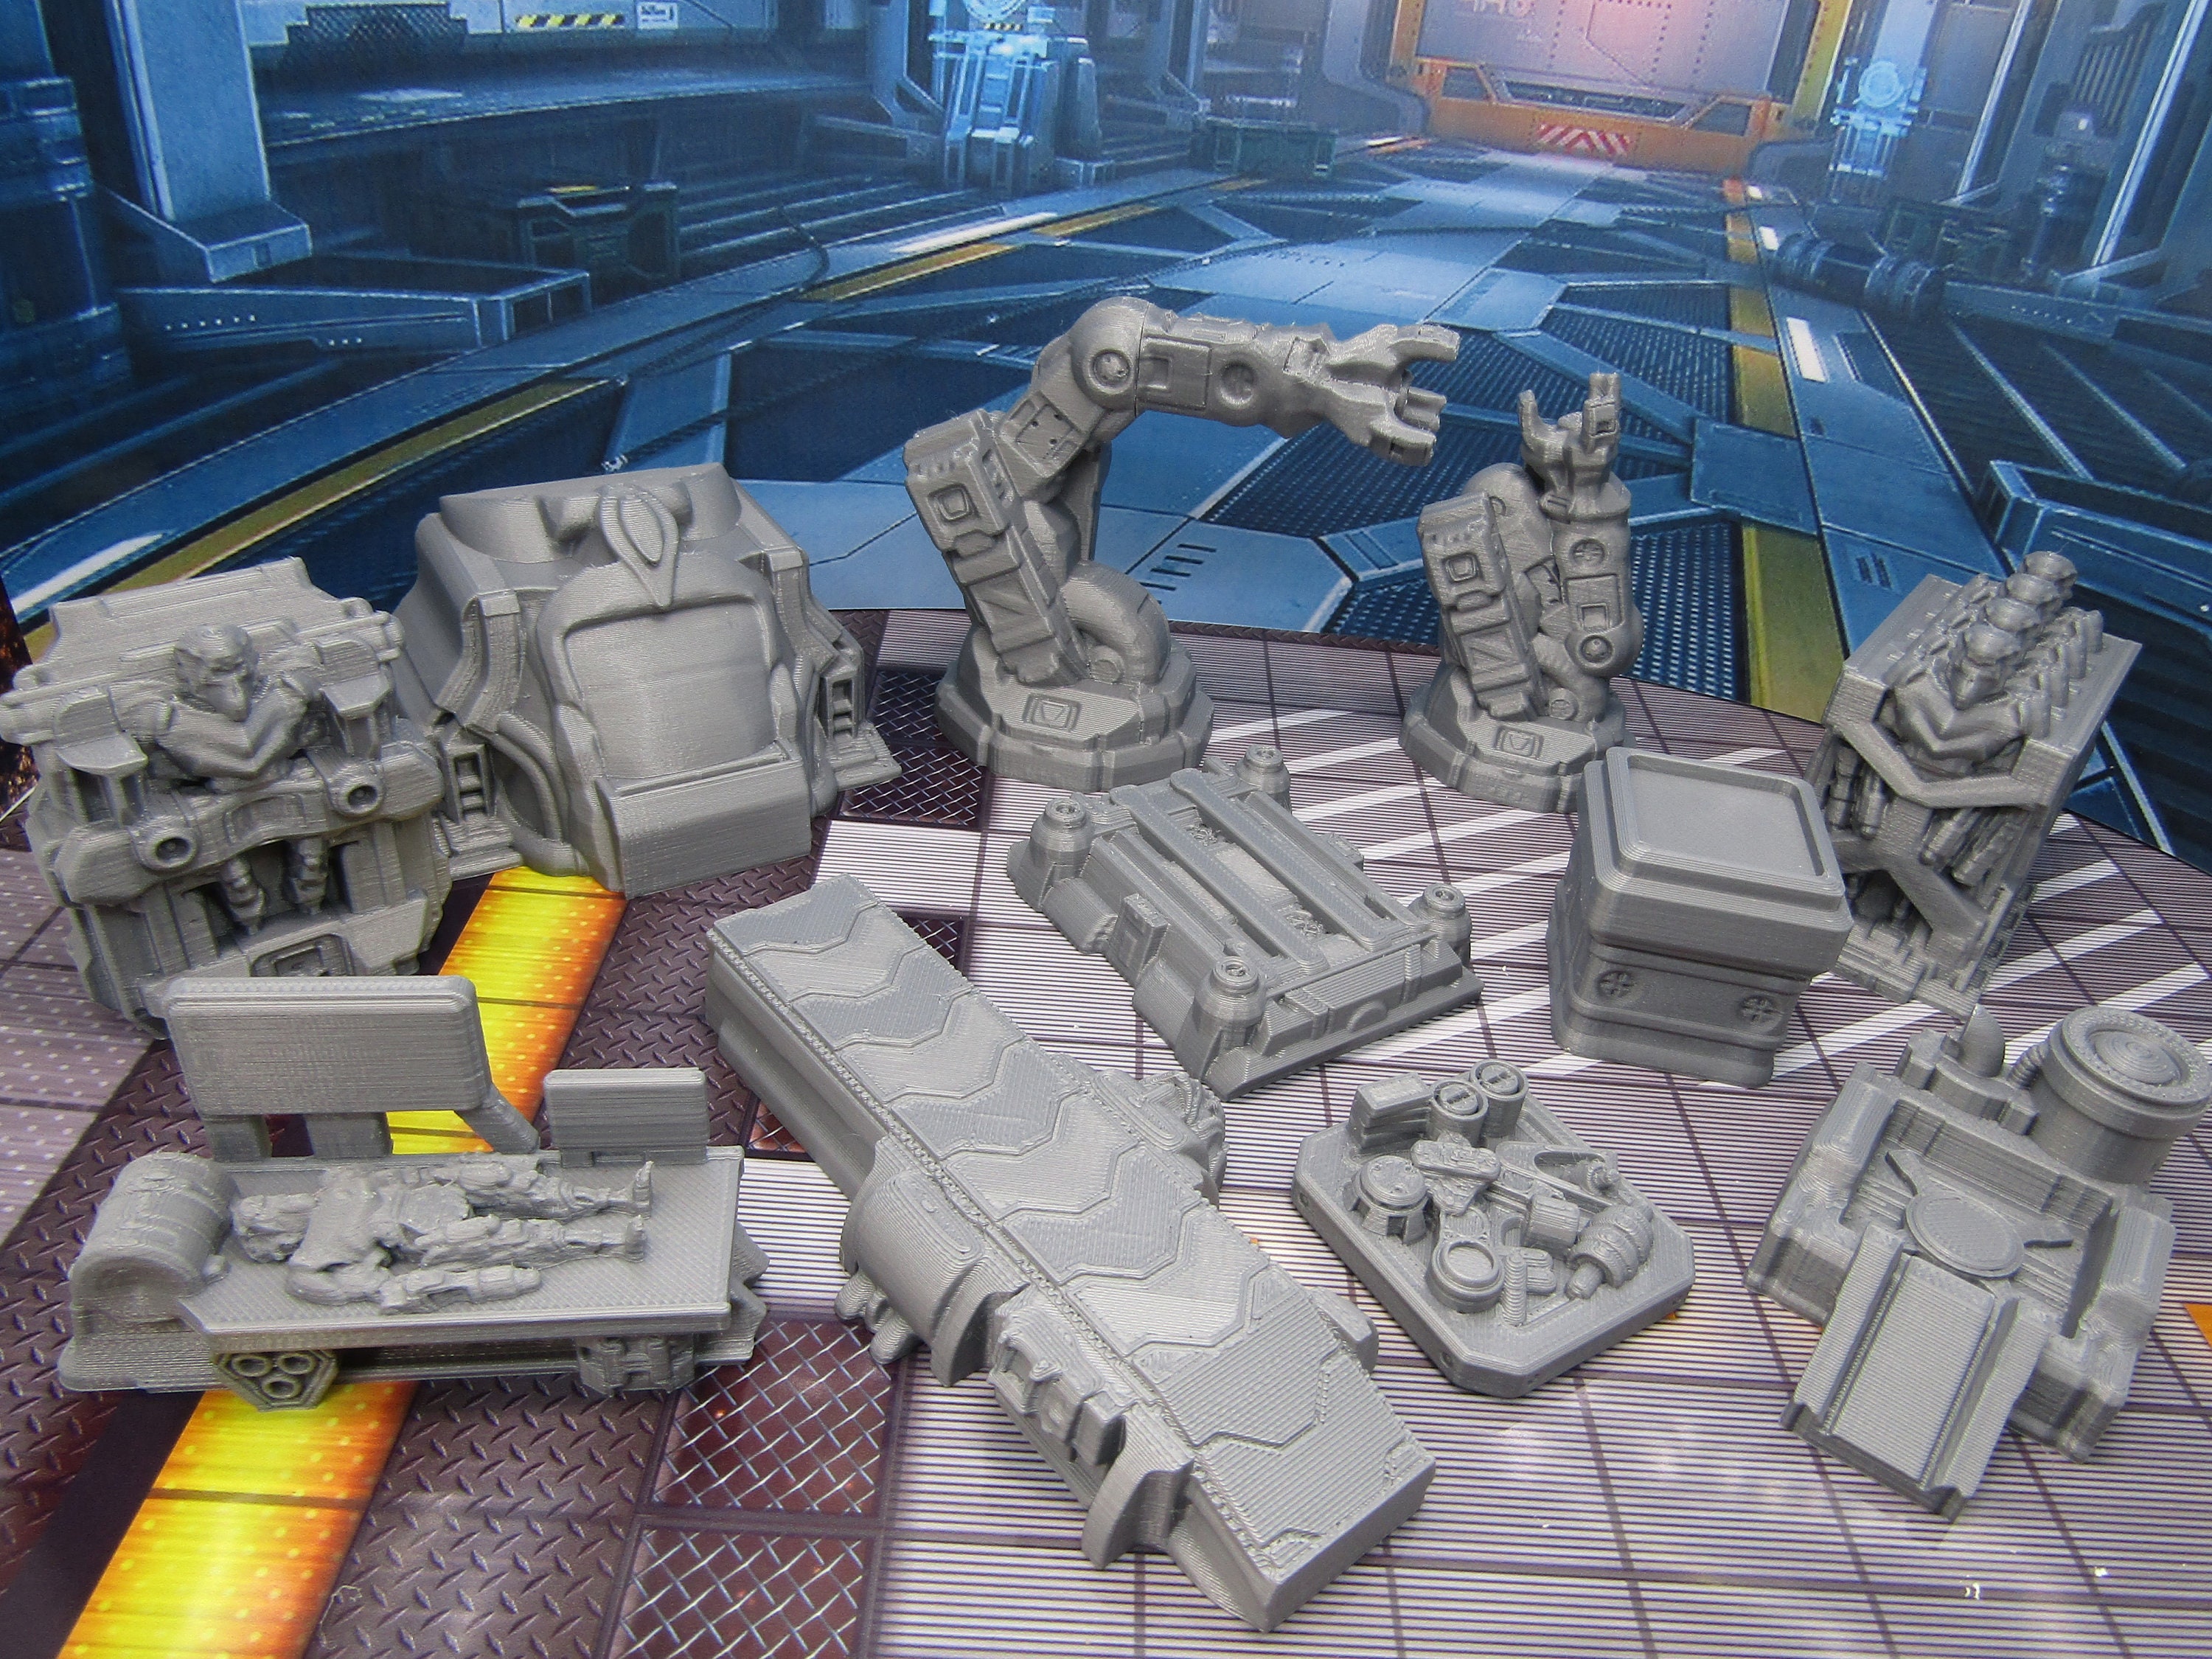 Robots & Drones Miniatures Scenery 3D Printed Model 2832mm Scale Science Fiction RPG Tabletop Gaming Sci Fi Mini Set 1-12 pc Droids